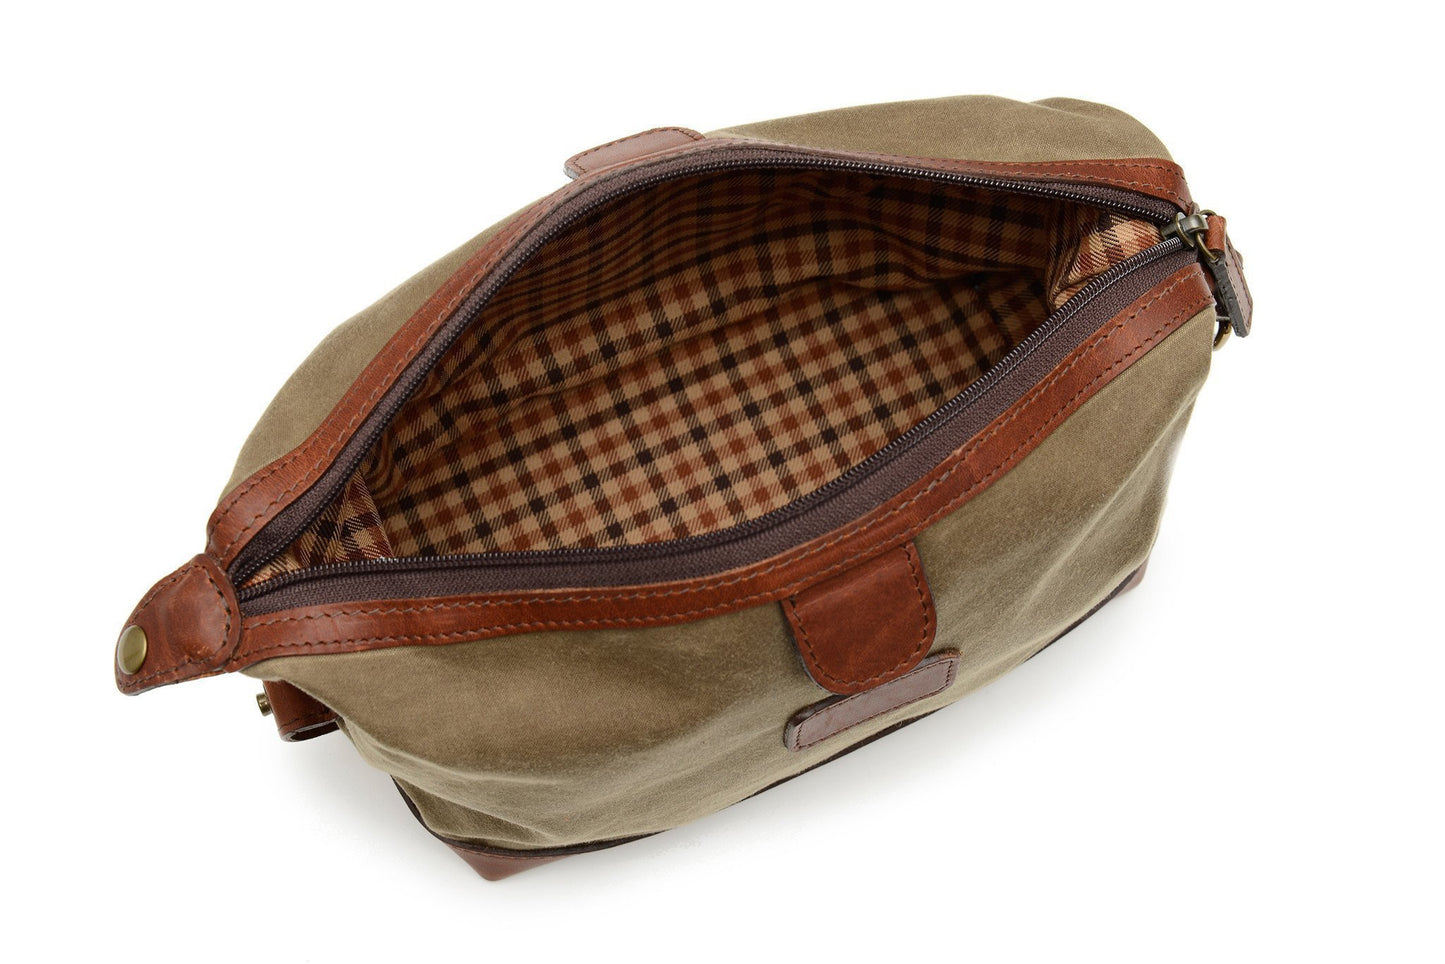 Ryder | Waxed Cotton Canvas | Zipper Toilet Kit | Travel Bag with Leather Trim | Made in America | Korchmar-Korchmar Travel-Sterling-and-Burke